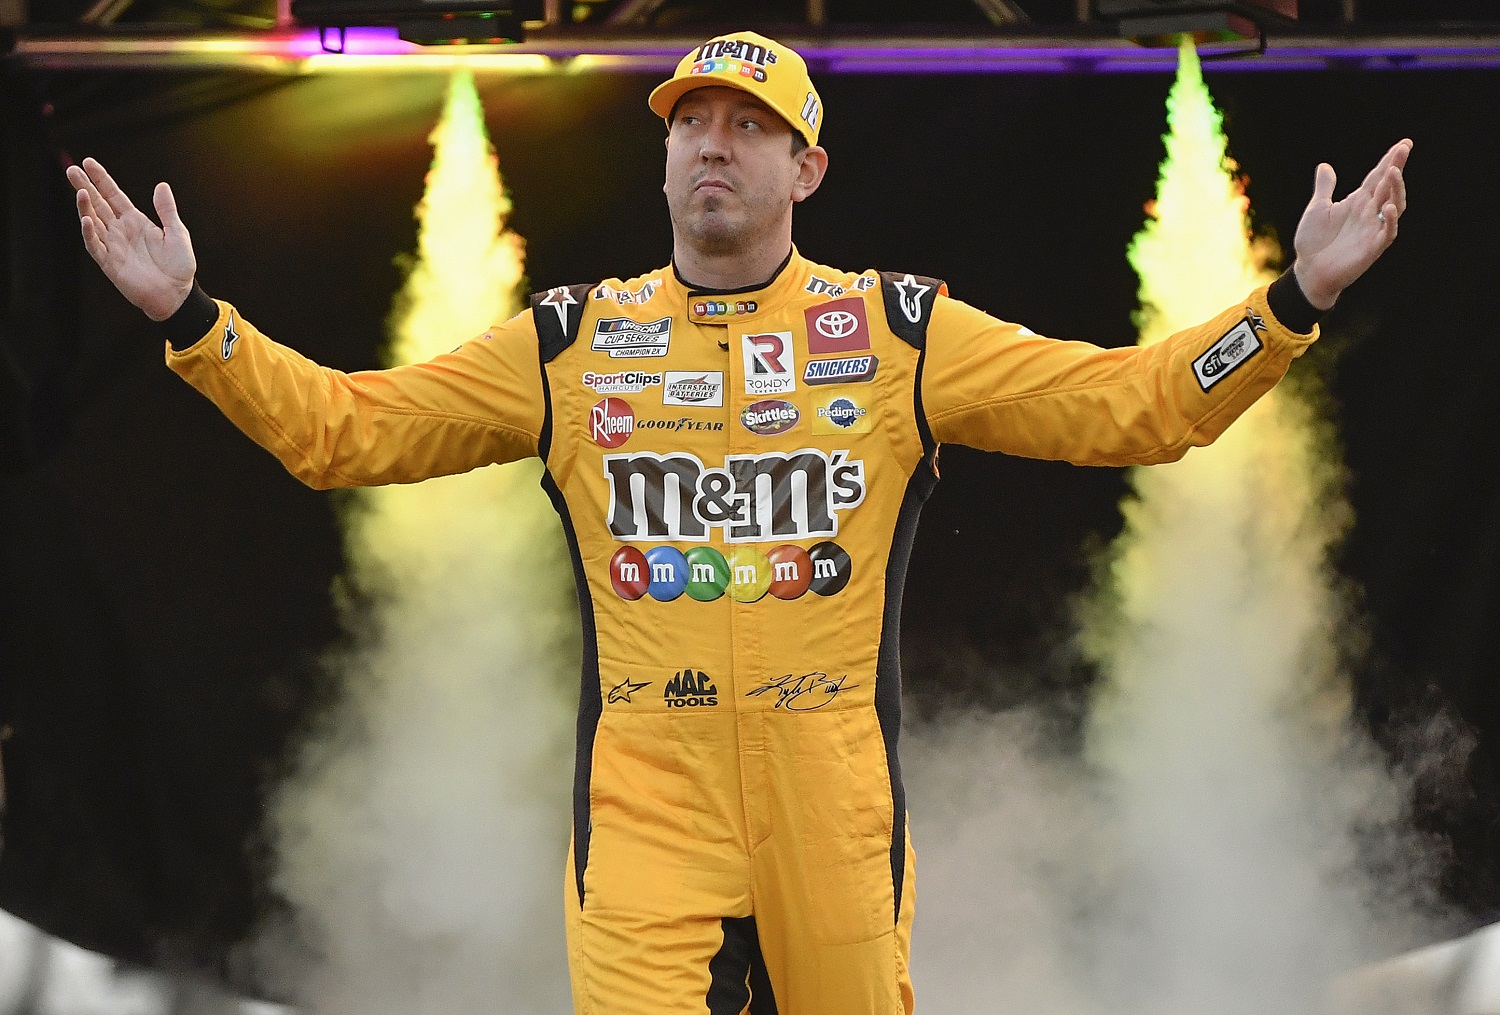 Kyle Busch walks onstage during driver intros prior to the NASCAR Cup Series Bass Pro Shops Night Race at Bristol Motor Speedway on Sept. 17, 2022. | Logan Riely/Getty Images